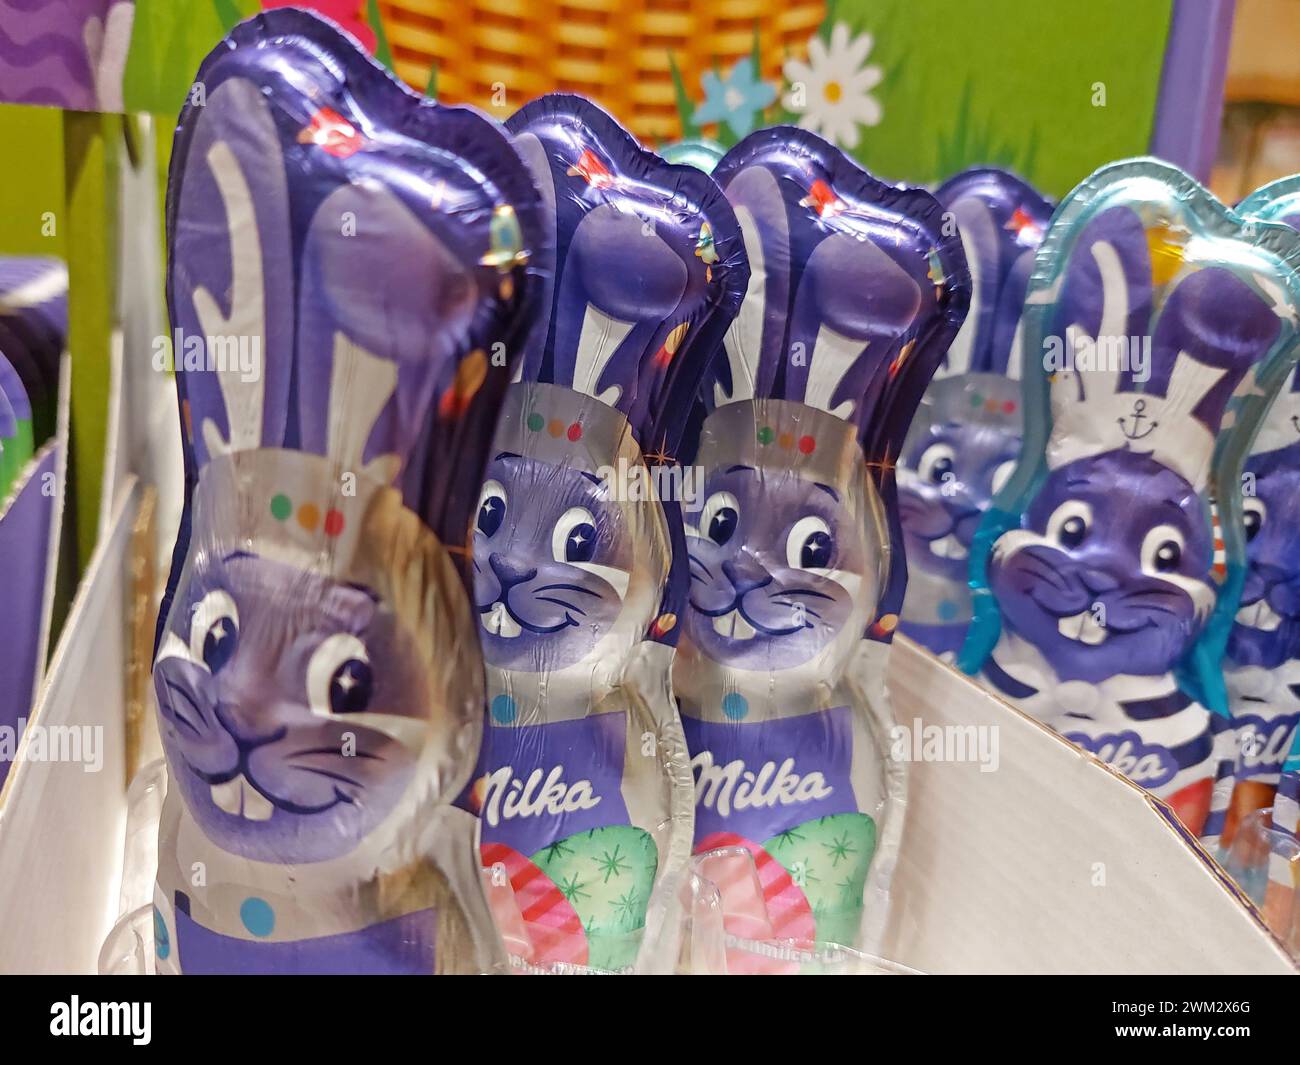 Milka easter chocolate rabbits in a supermarket Stock Photo